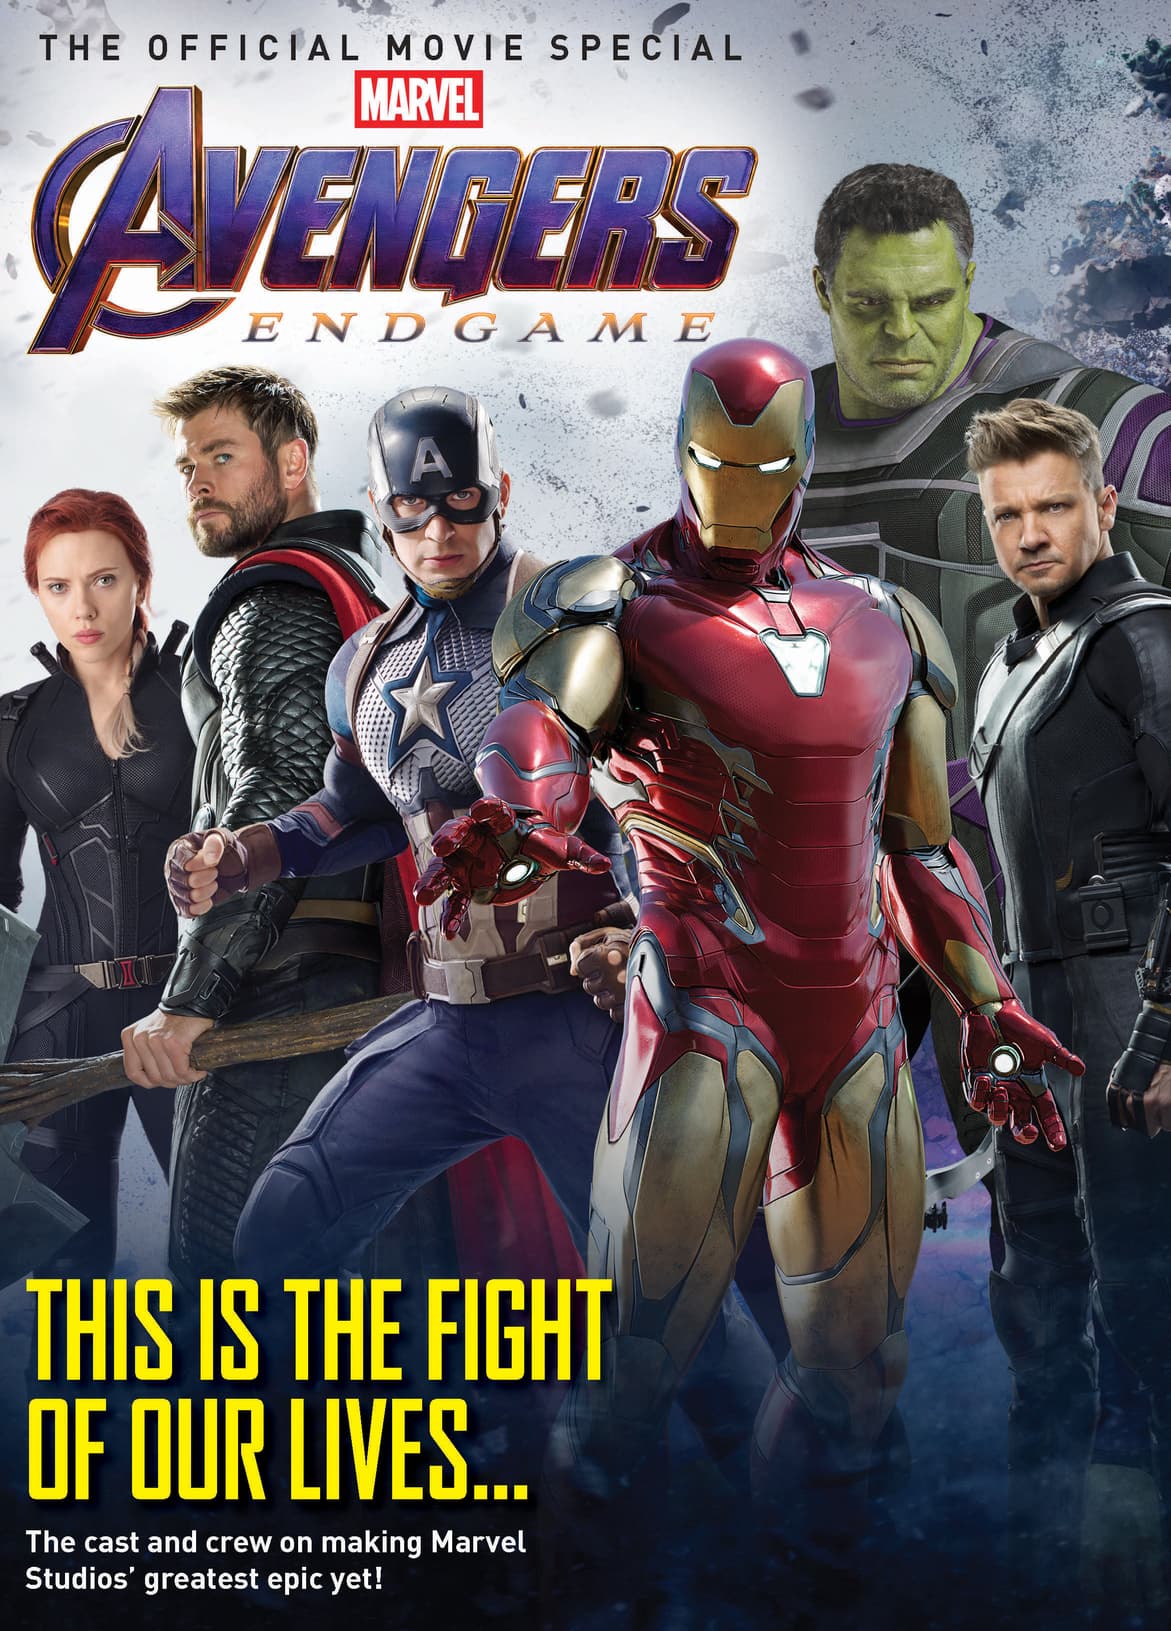 Newstand cover of Avengers Endgame Official Movie Special